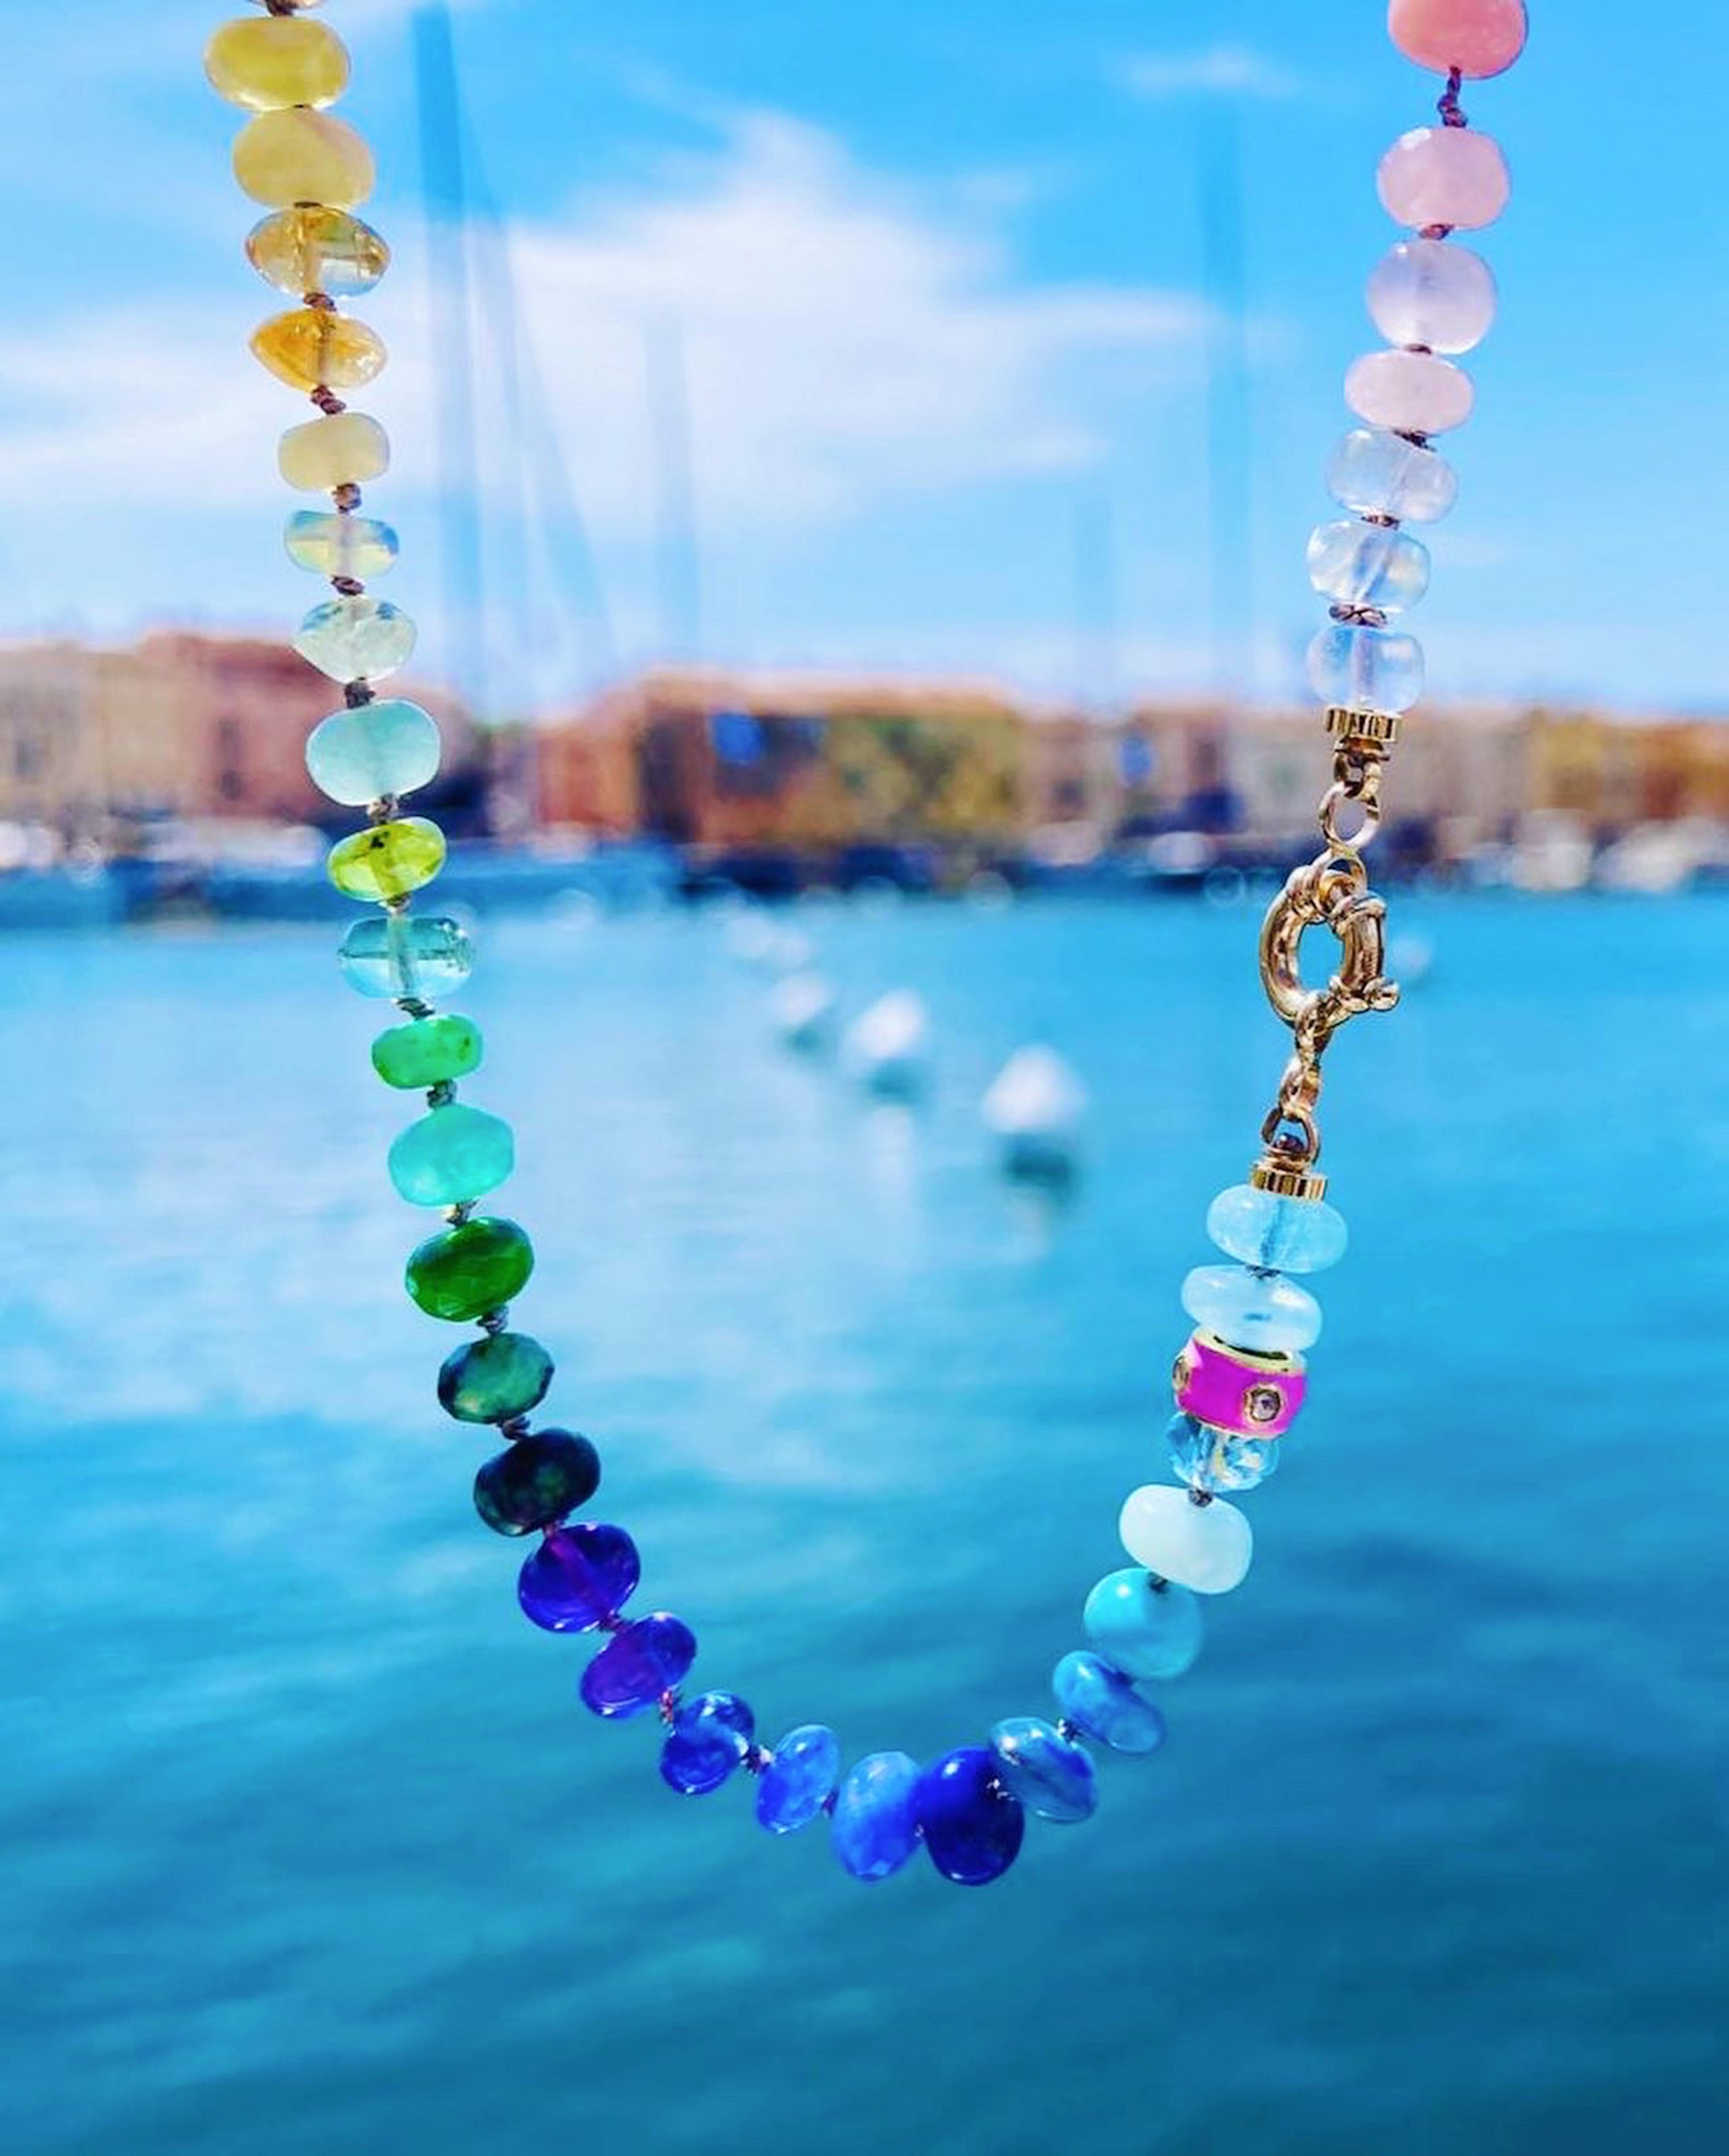 This vibrand hand made rainbow gemstone necklace includes polished bright 6mm multi-colored rondelle shaped gemstones, such as: 

• Sapphire
• Peruvian Amazonite
• Garnet
• Swiss topaz
• Tanzanite
• Chrome Diopside
• Emerald
• Ethiopian opal
•